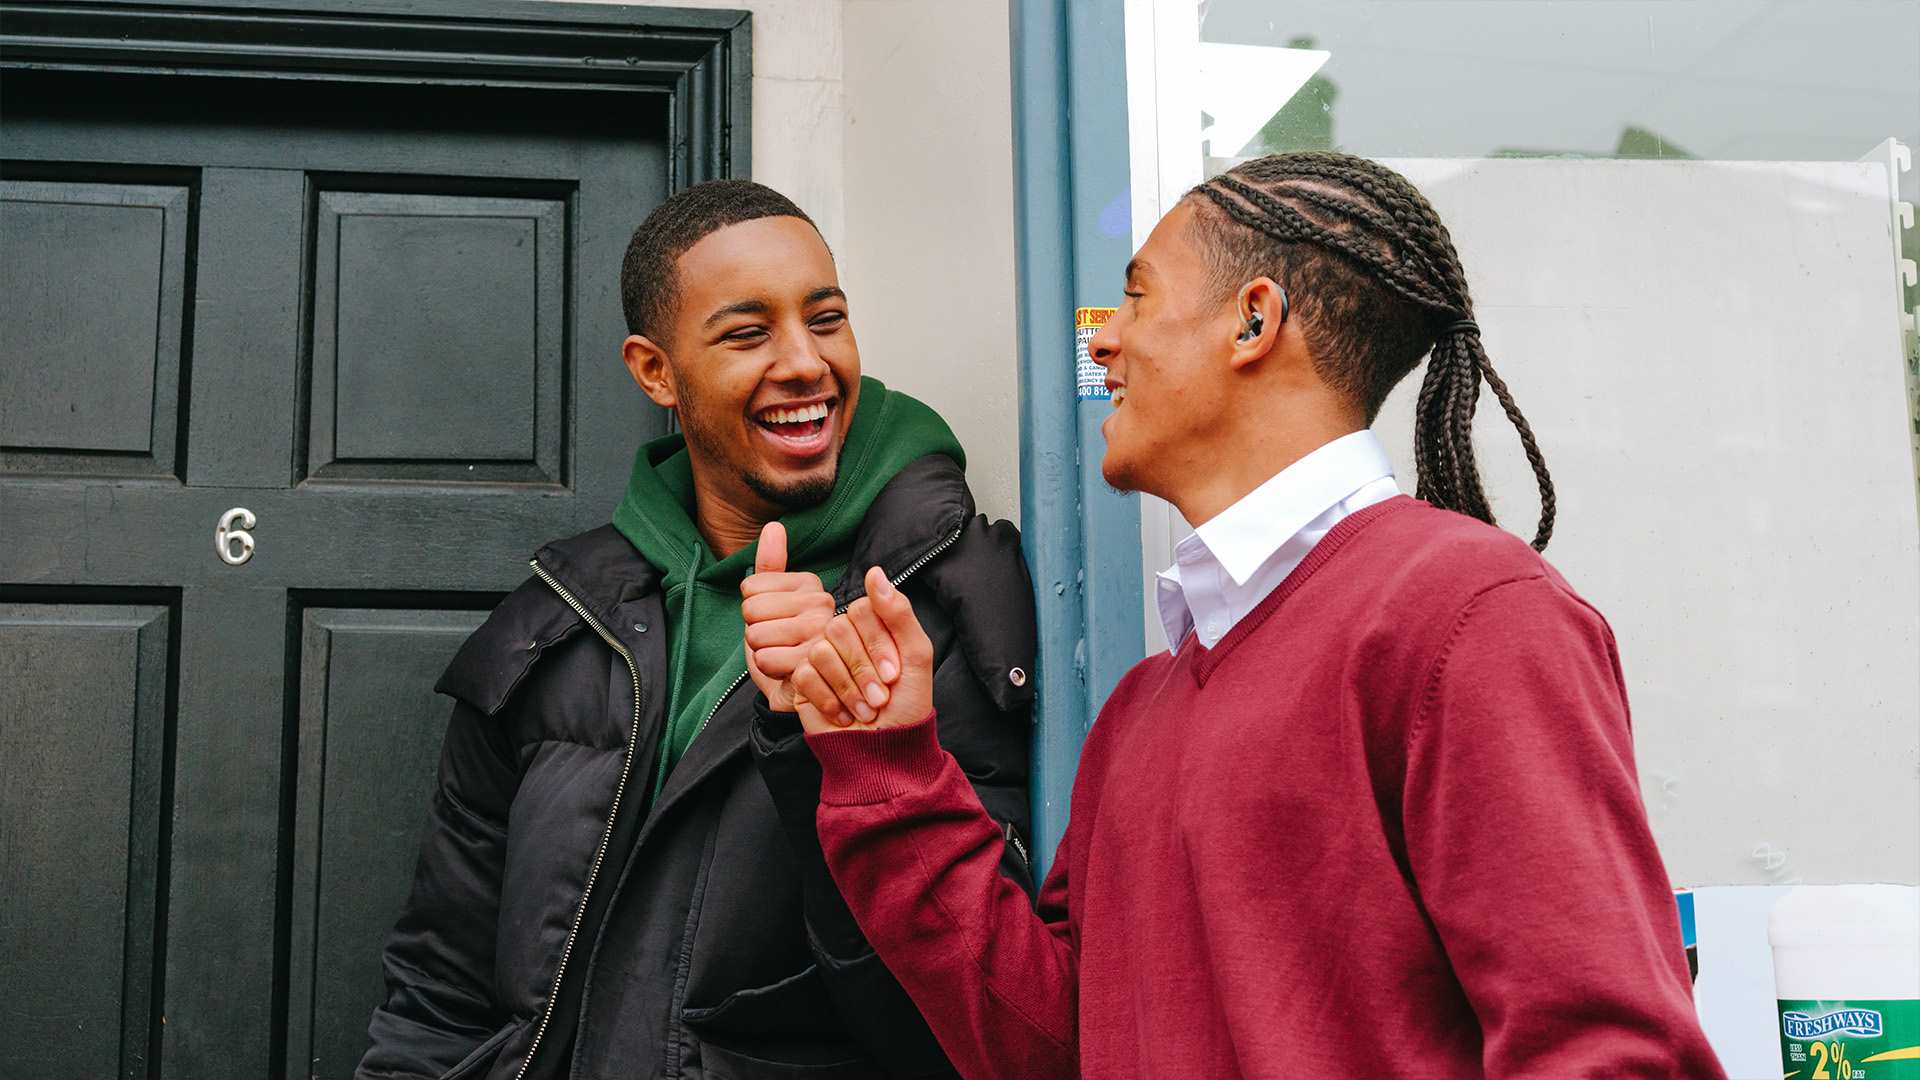 A Black teenage boy wearing a hearing aid bumping fists with a young Black man outside a front door.